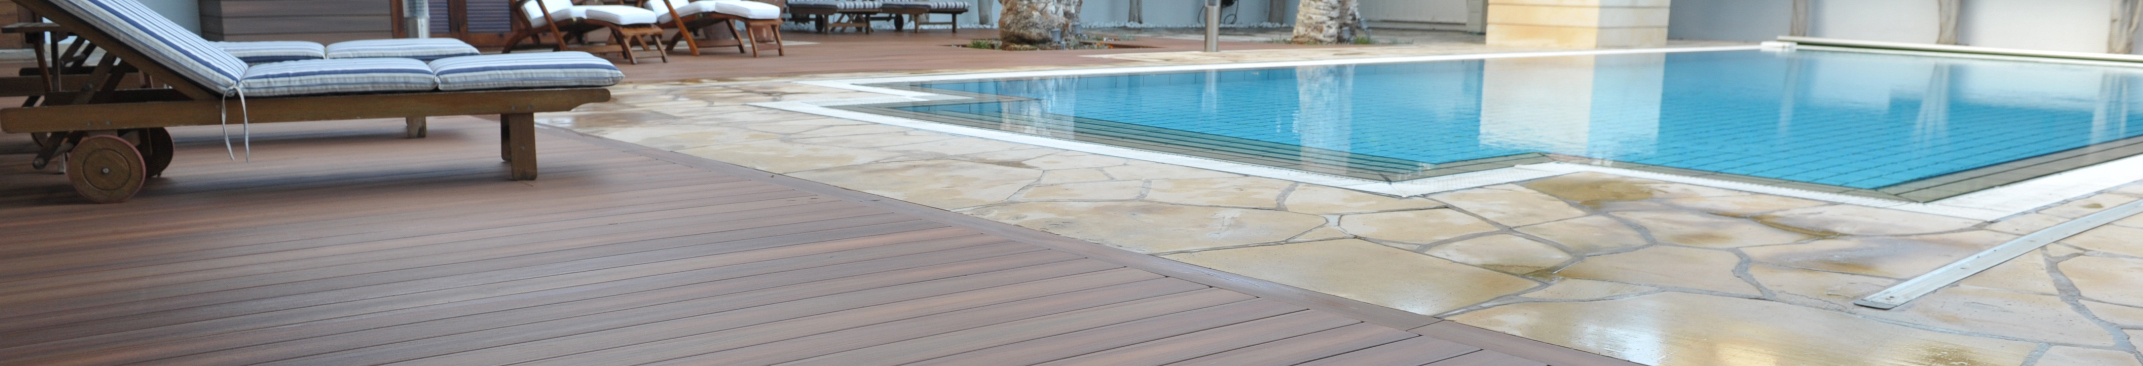 4 Benefits of Capped Composite Decking Over Traditional Wood Decking